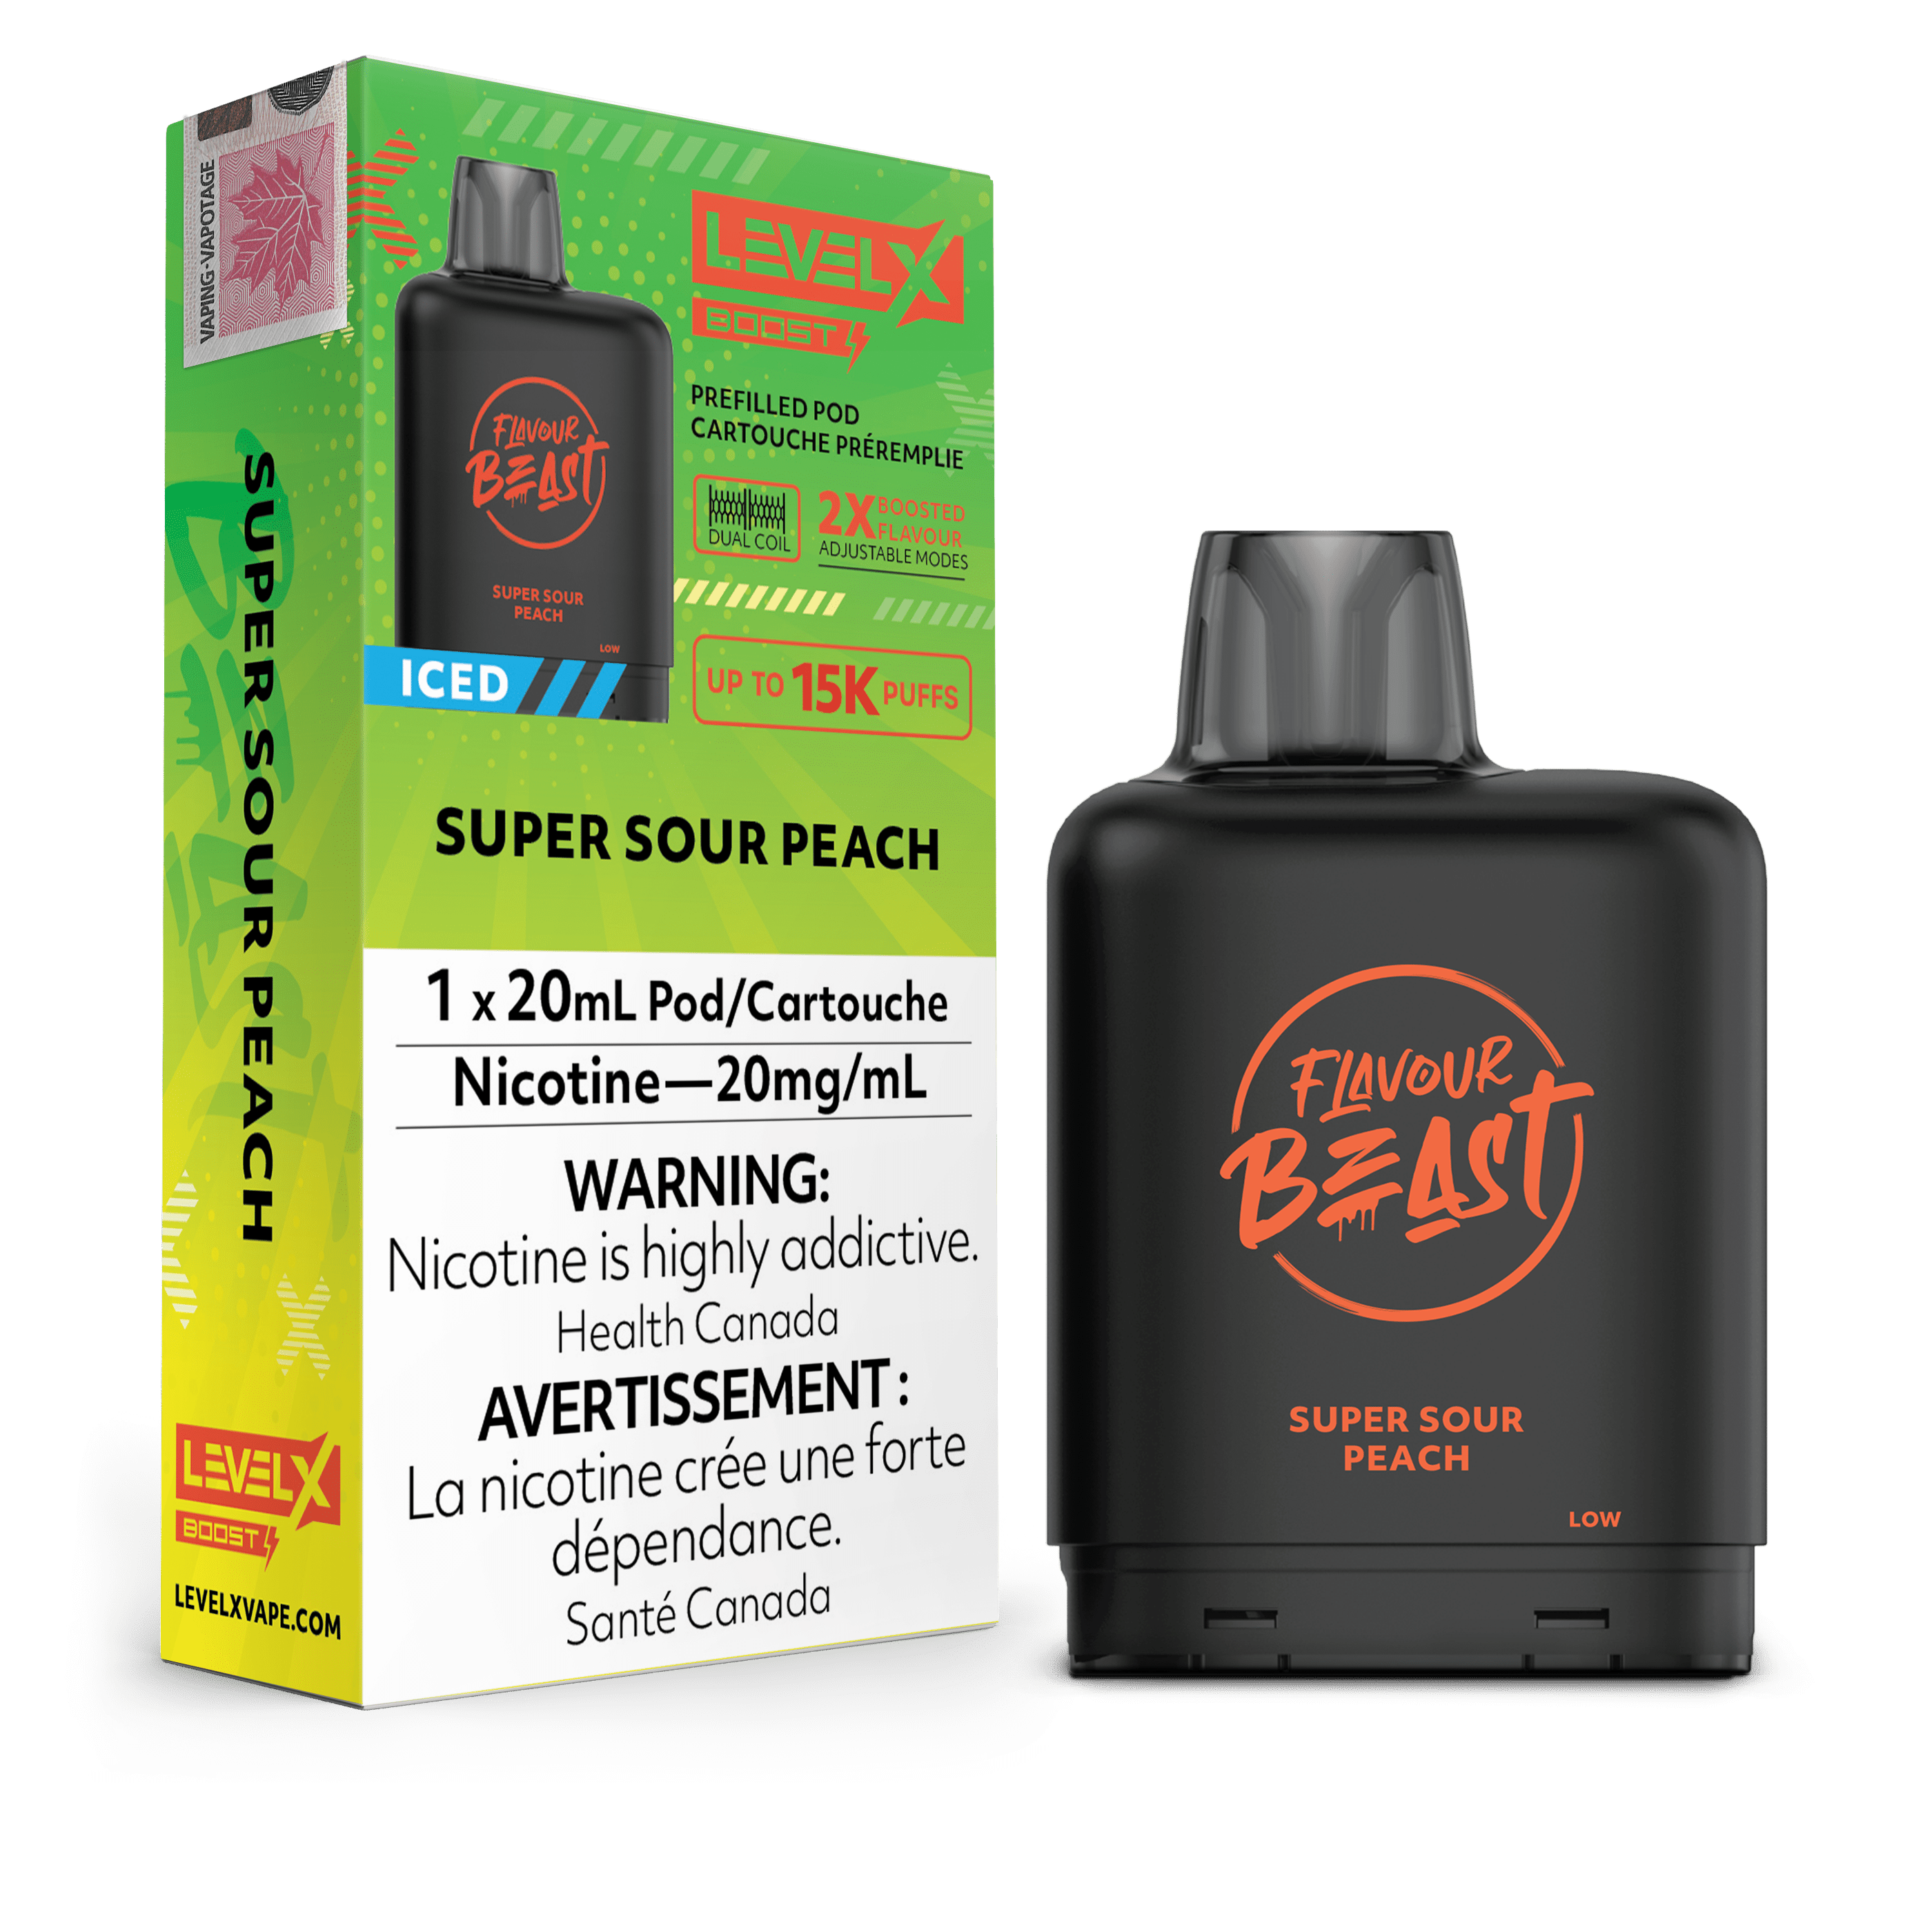 Level X Flavour Beast Boost Pod - Super Sour Peach Iced available on Canada online vape shop